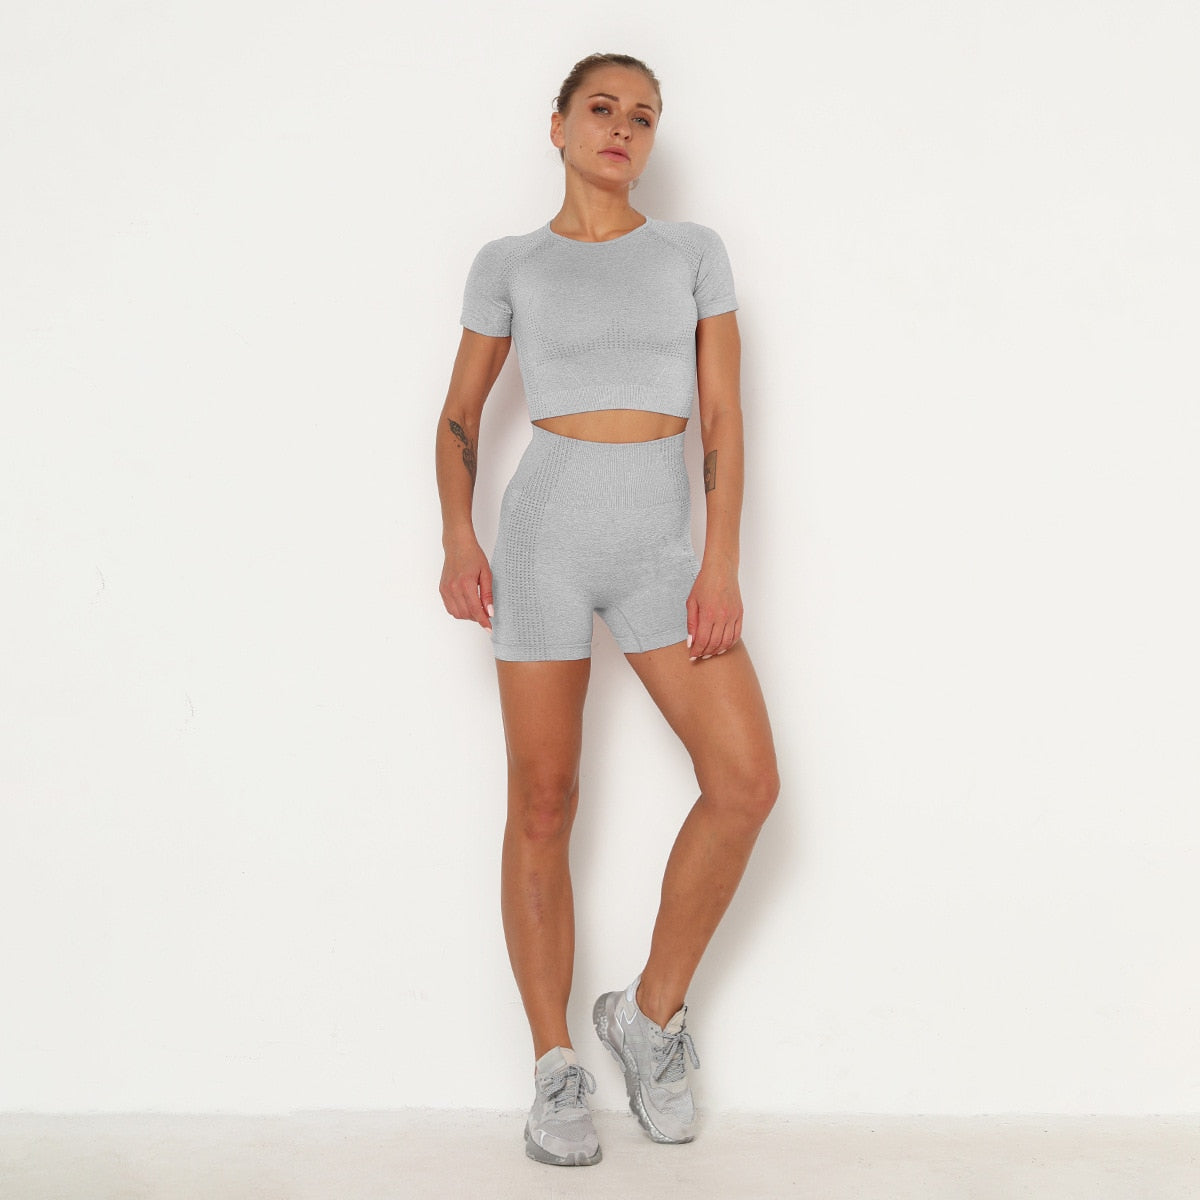 Slim Fit Shorts Set (Shorts + Top) by Stylish AF Fitness Co